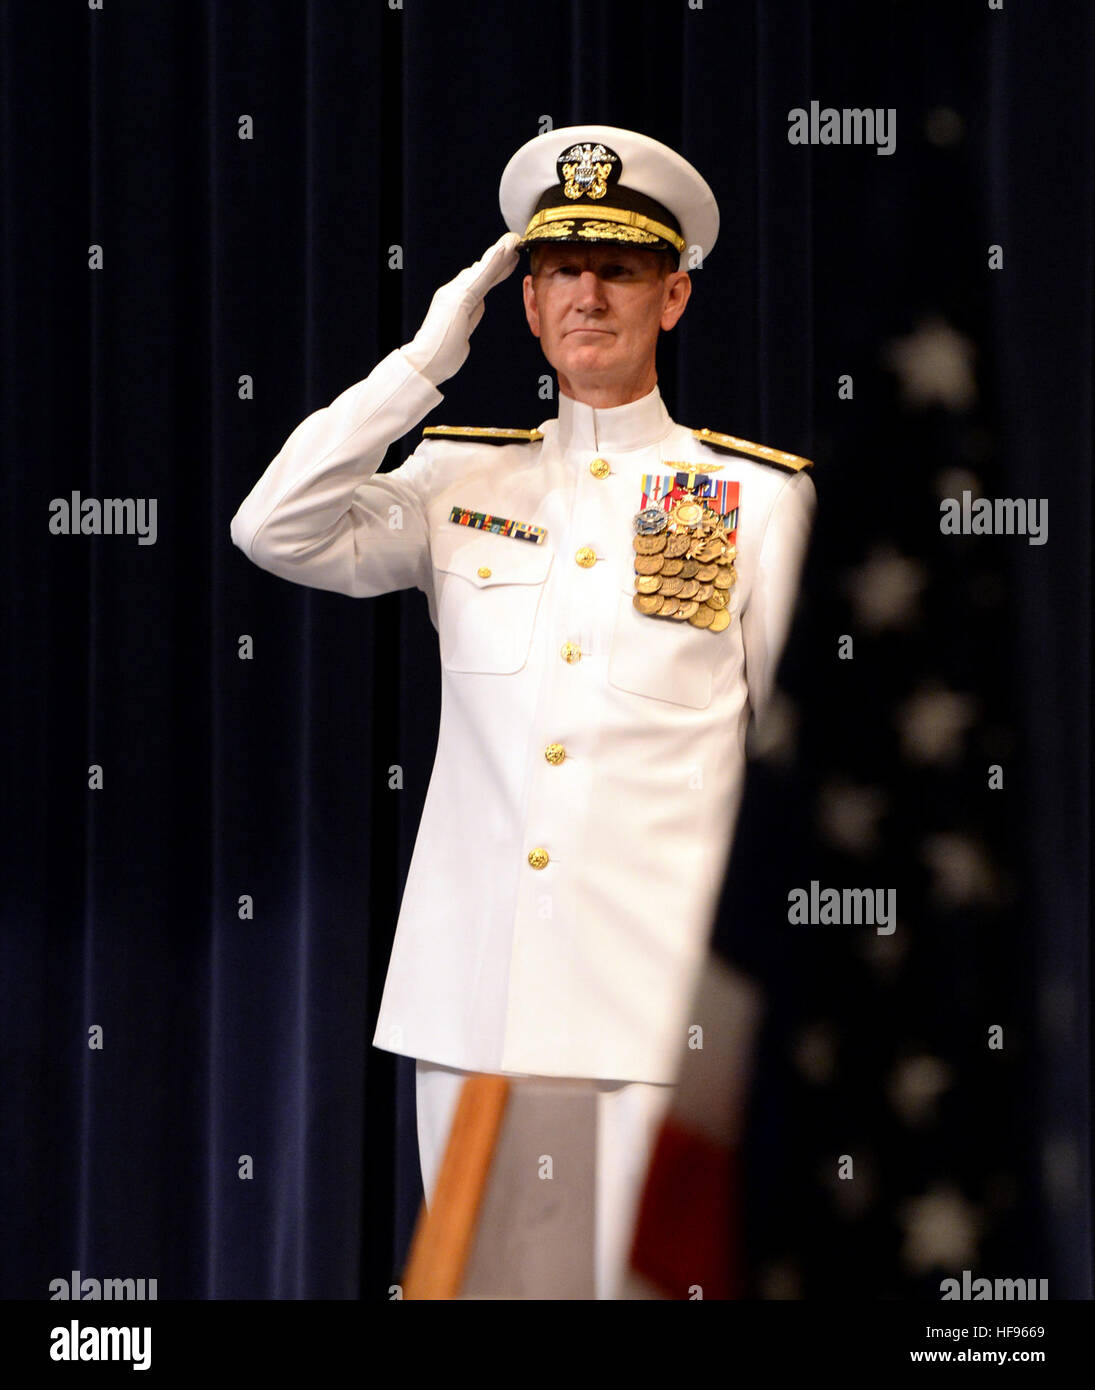 Rear Adm. Walter E. 'Ted' Carter Jr., renders honors during colors as part of a change of command ceremony at U.S. Naval War College (NWC) in Newport, R.I., with Chief of Naval Operations Adm. Jonathan Greenert. During the ceremony, and Rear Adm. P. Gardner Howe III relieved Carter and became the 55th president and first Navy SEAL in command of the NWC. Howe, a U.S. Naval Academy, Naval Postgraduate School and National War College graduate, holds dual Master of Arts degrees in national security and reports from his most recent assignment as commander of Special Operations Command, Pacific. Car Stock Photo